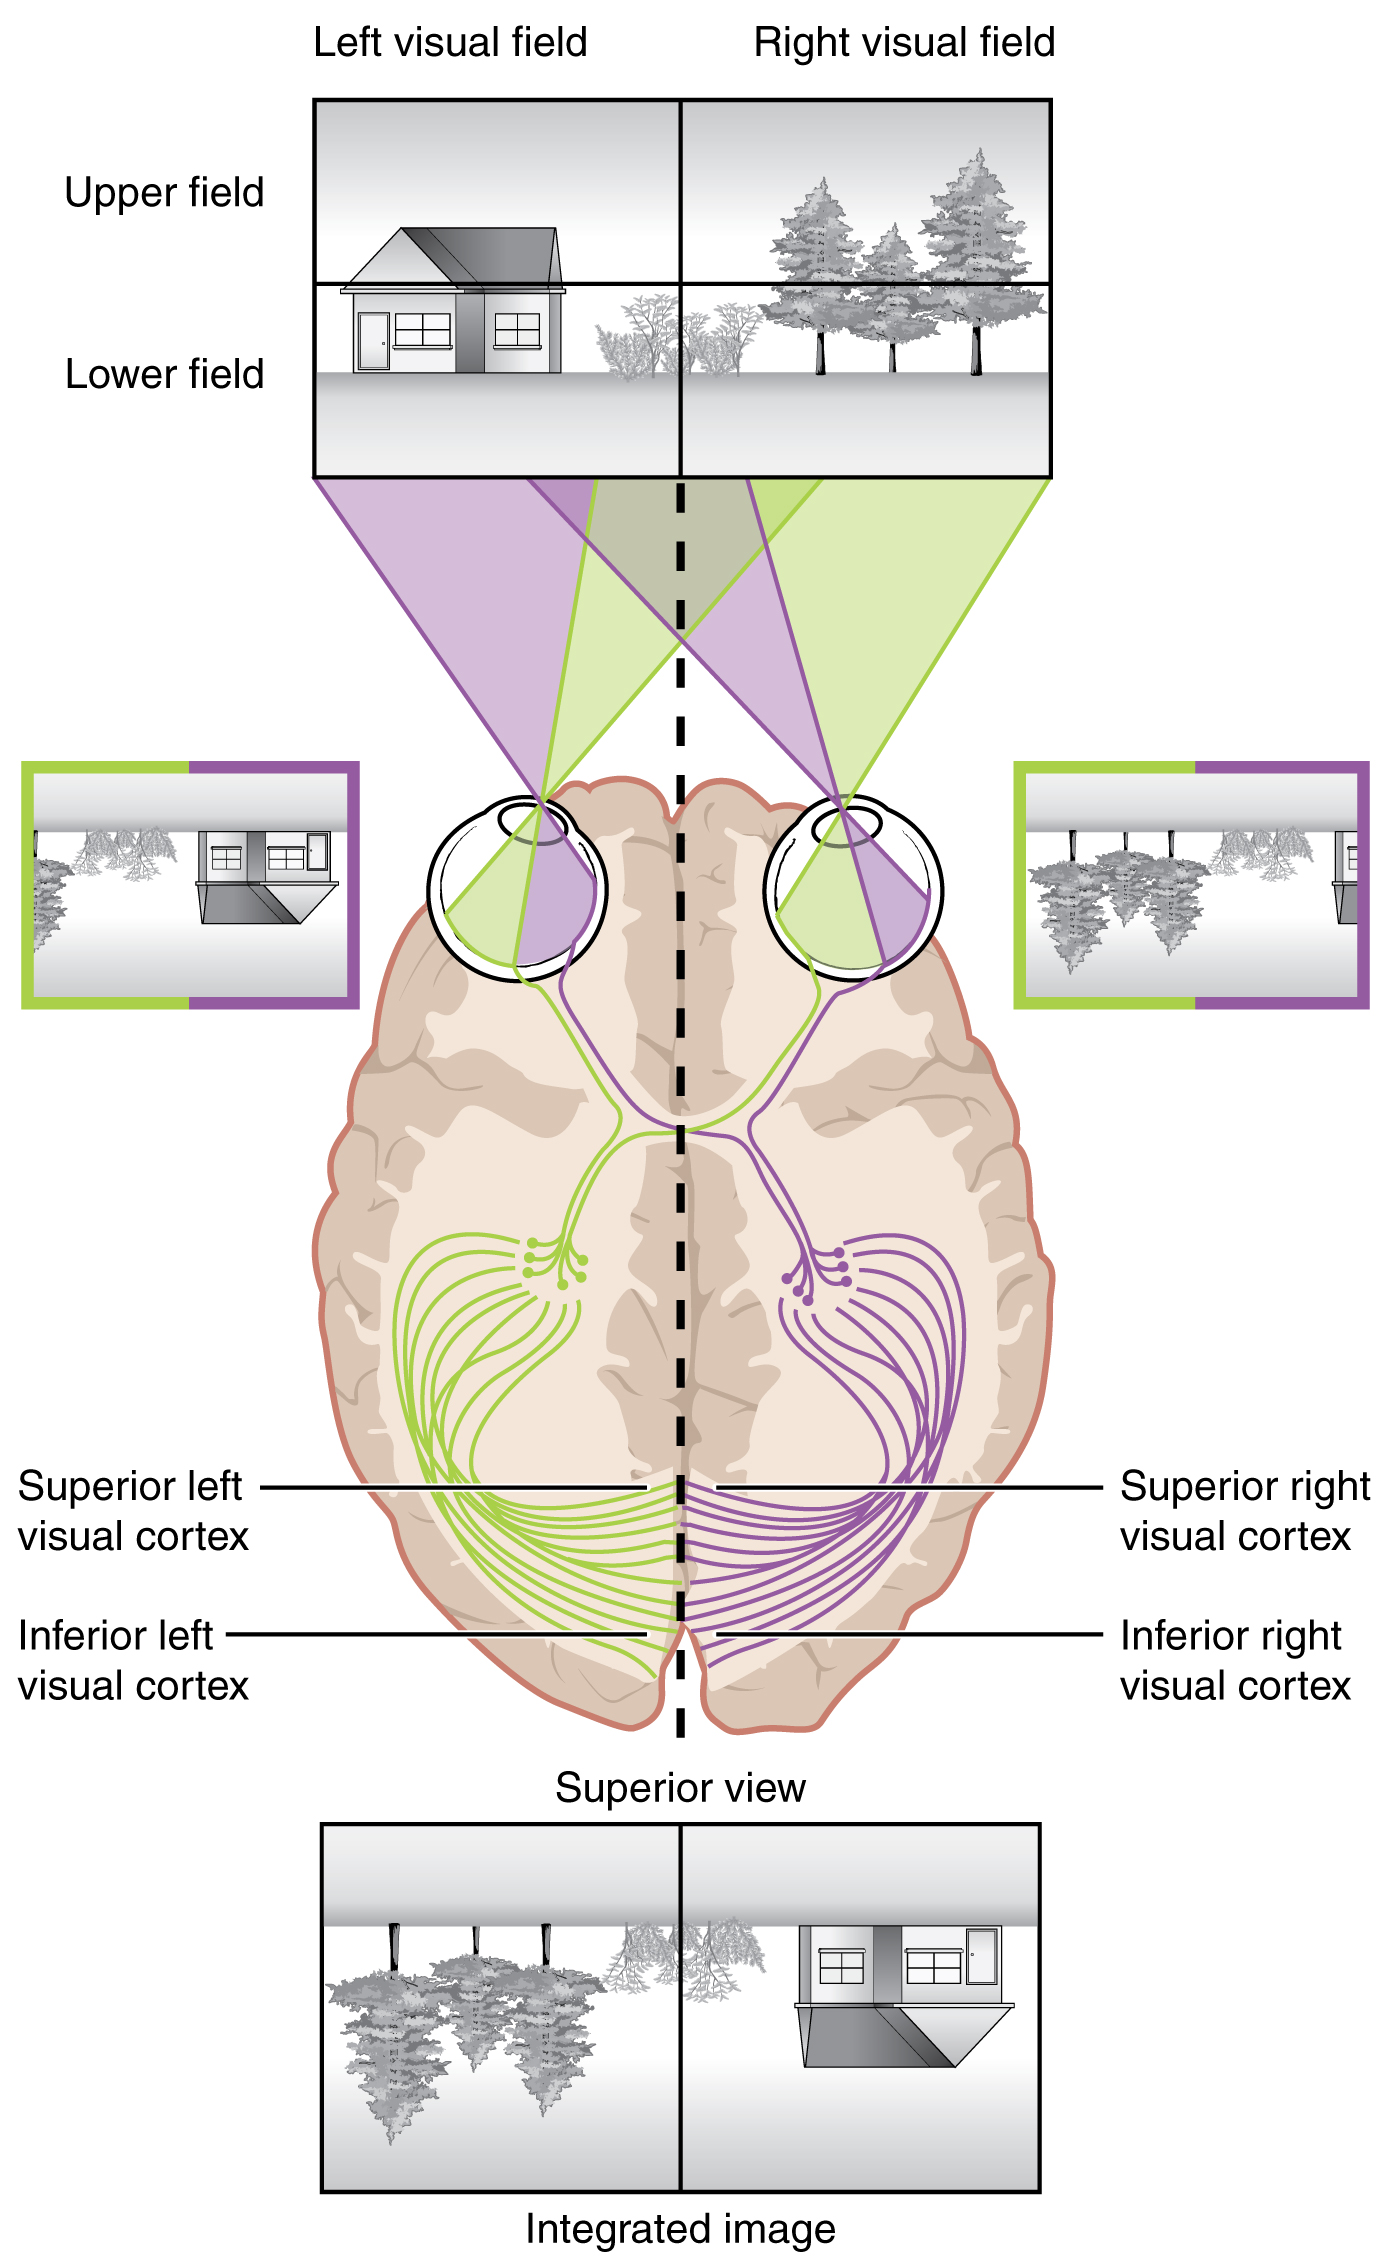 This image shows the mapping of the right and left visual fields on the brain. It also explains how the brain merges images from both visual fields.